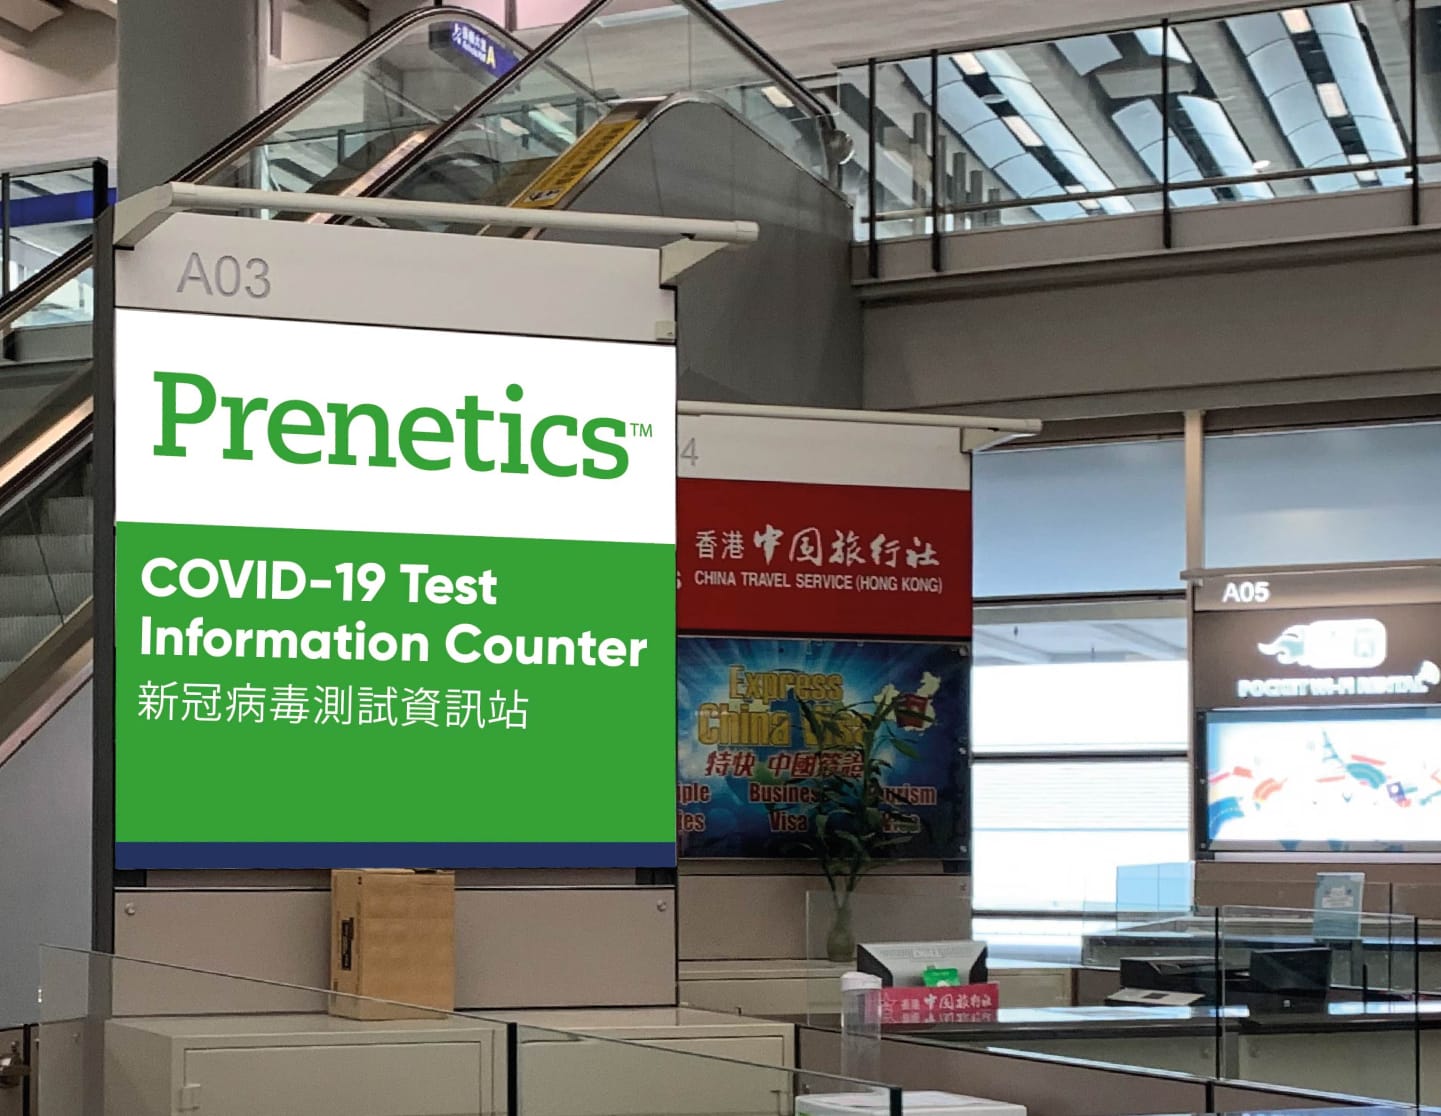 Daily Markup #403: Prenetics offers 60-min COVID-19 pre-departure testing at airport; Wallex marks important milestones for 2021; Horangi on building cyber resilience